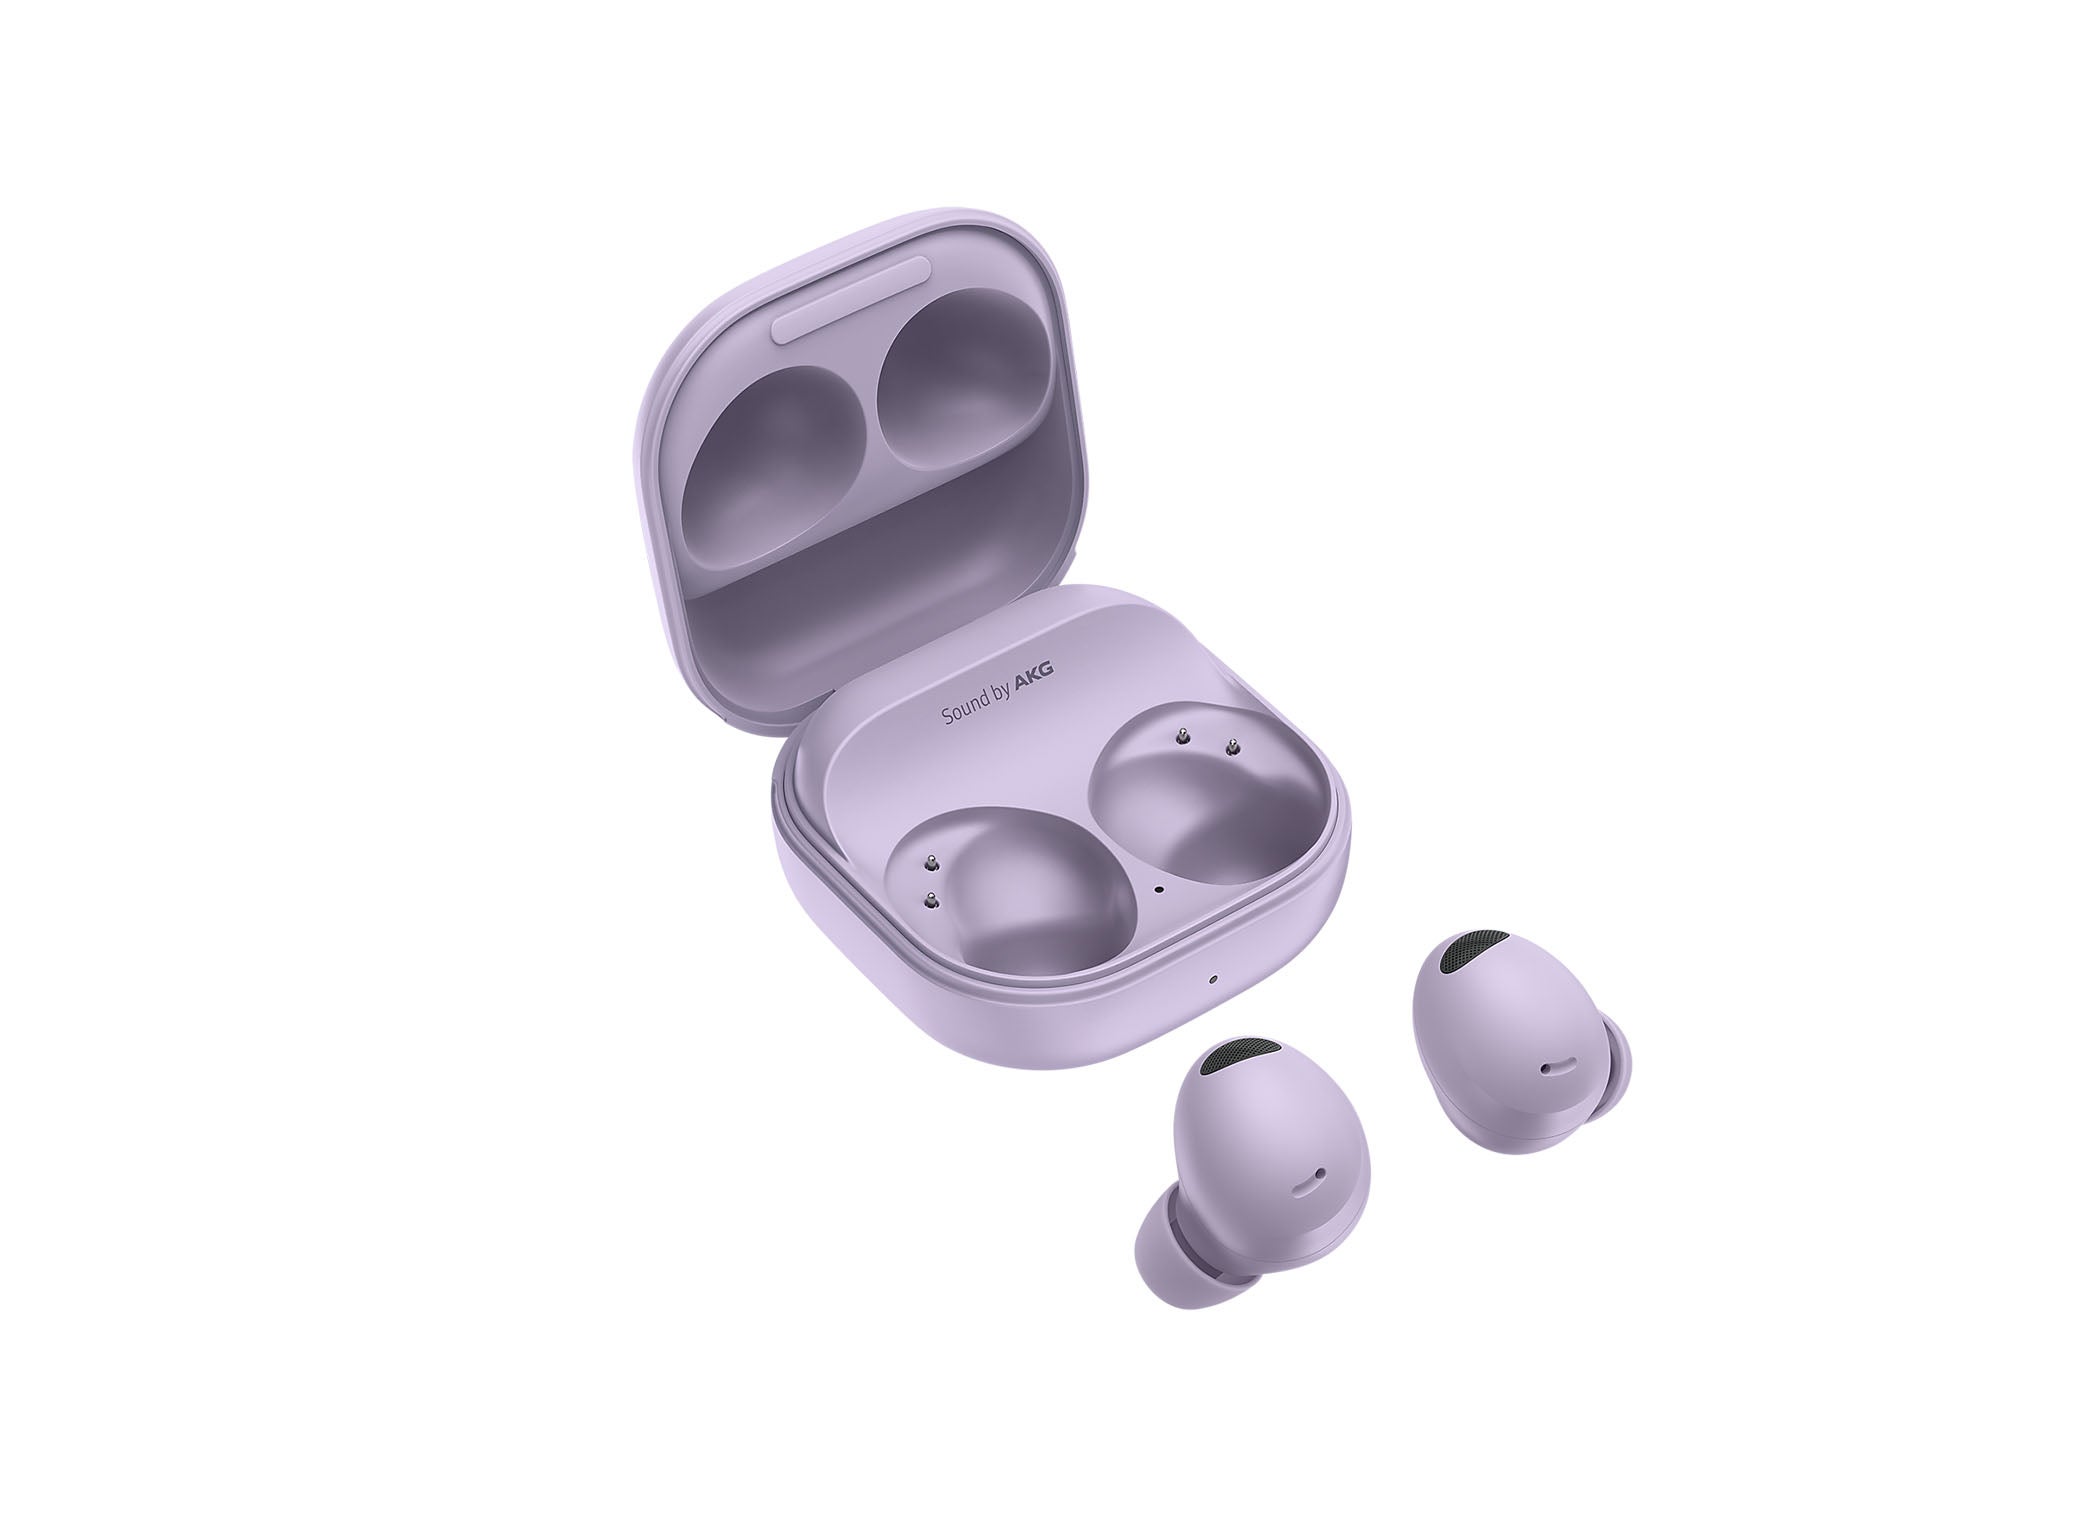 Samsung Galaxy buds pro 2: Pre-order this limited time deal | The